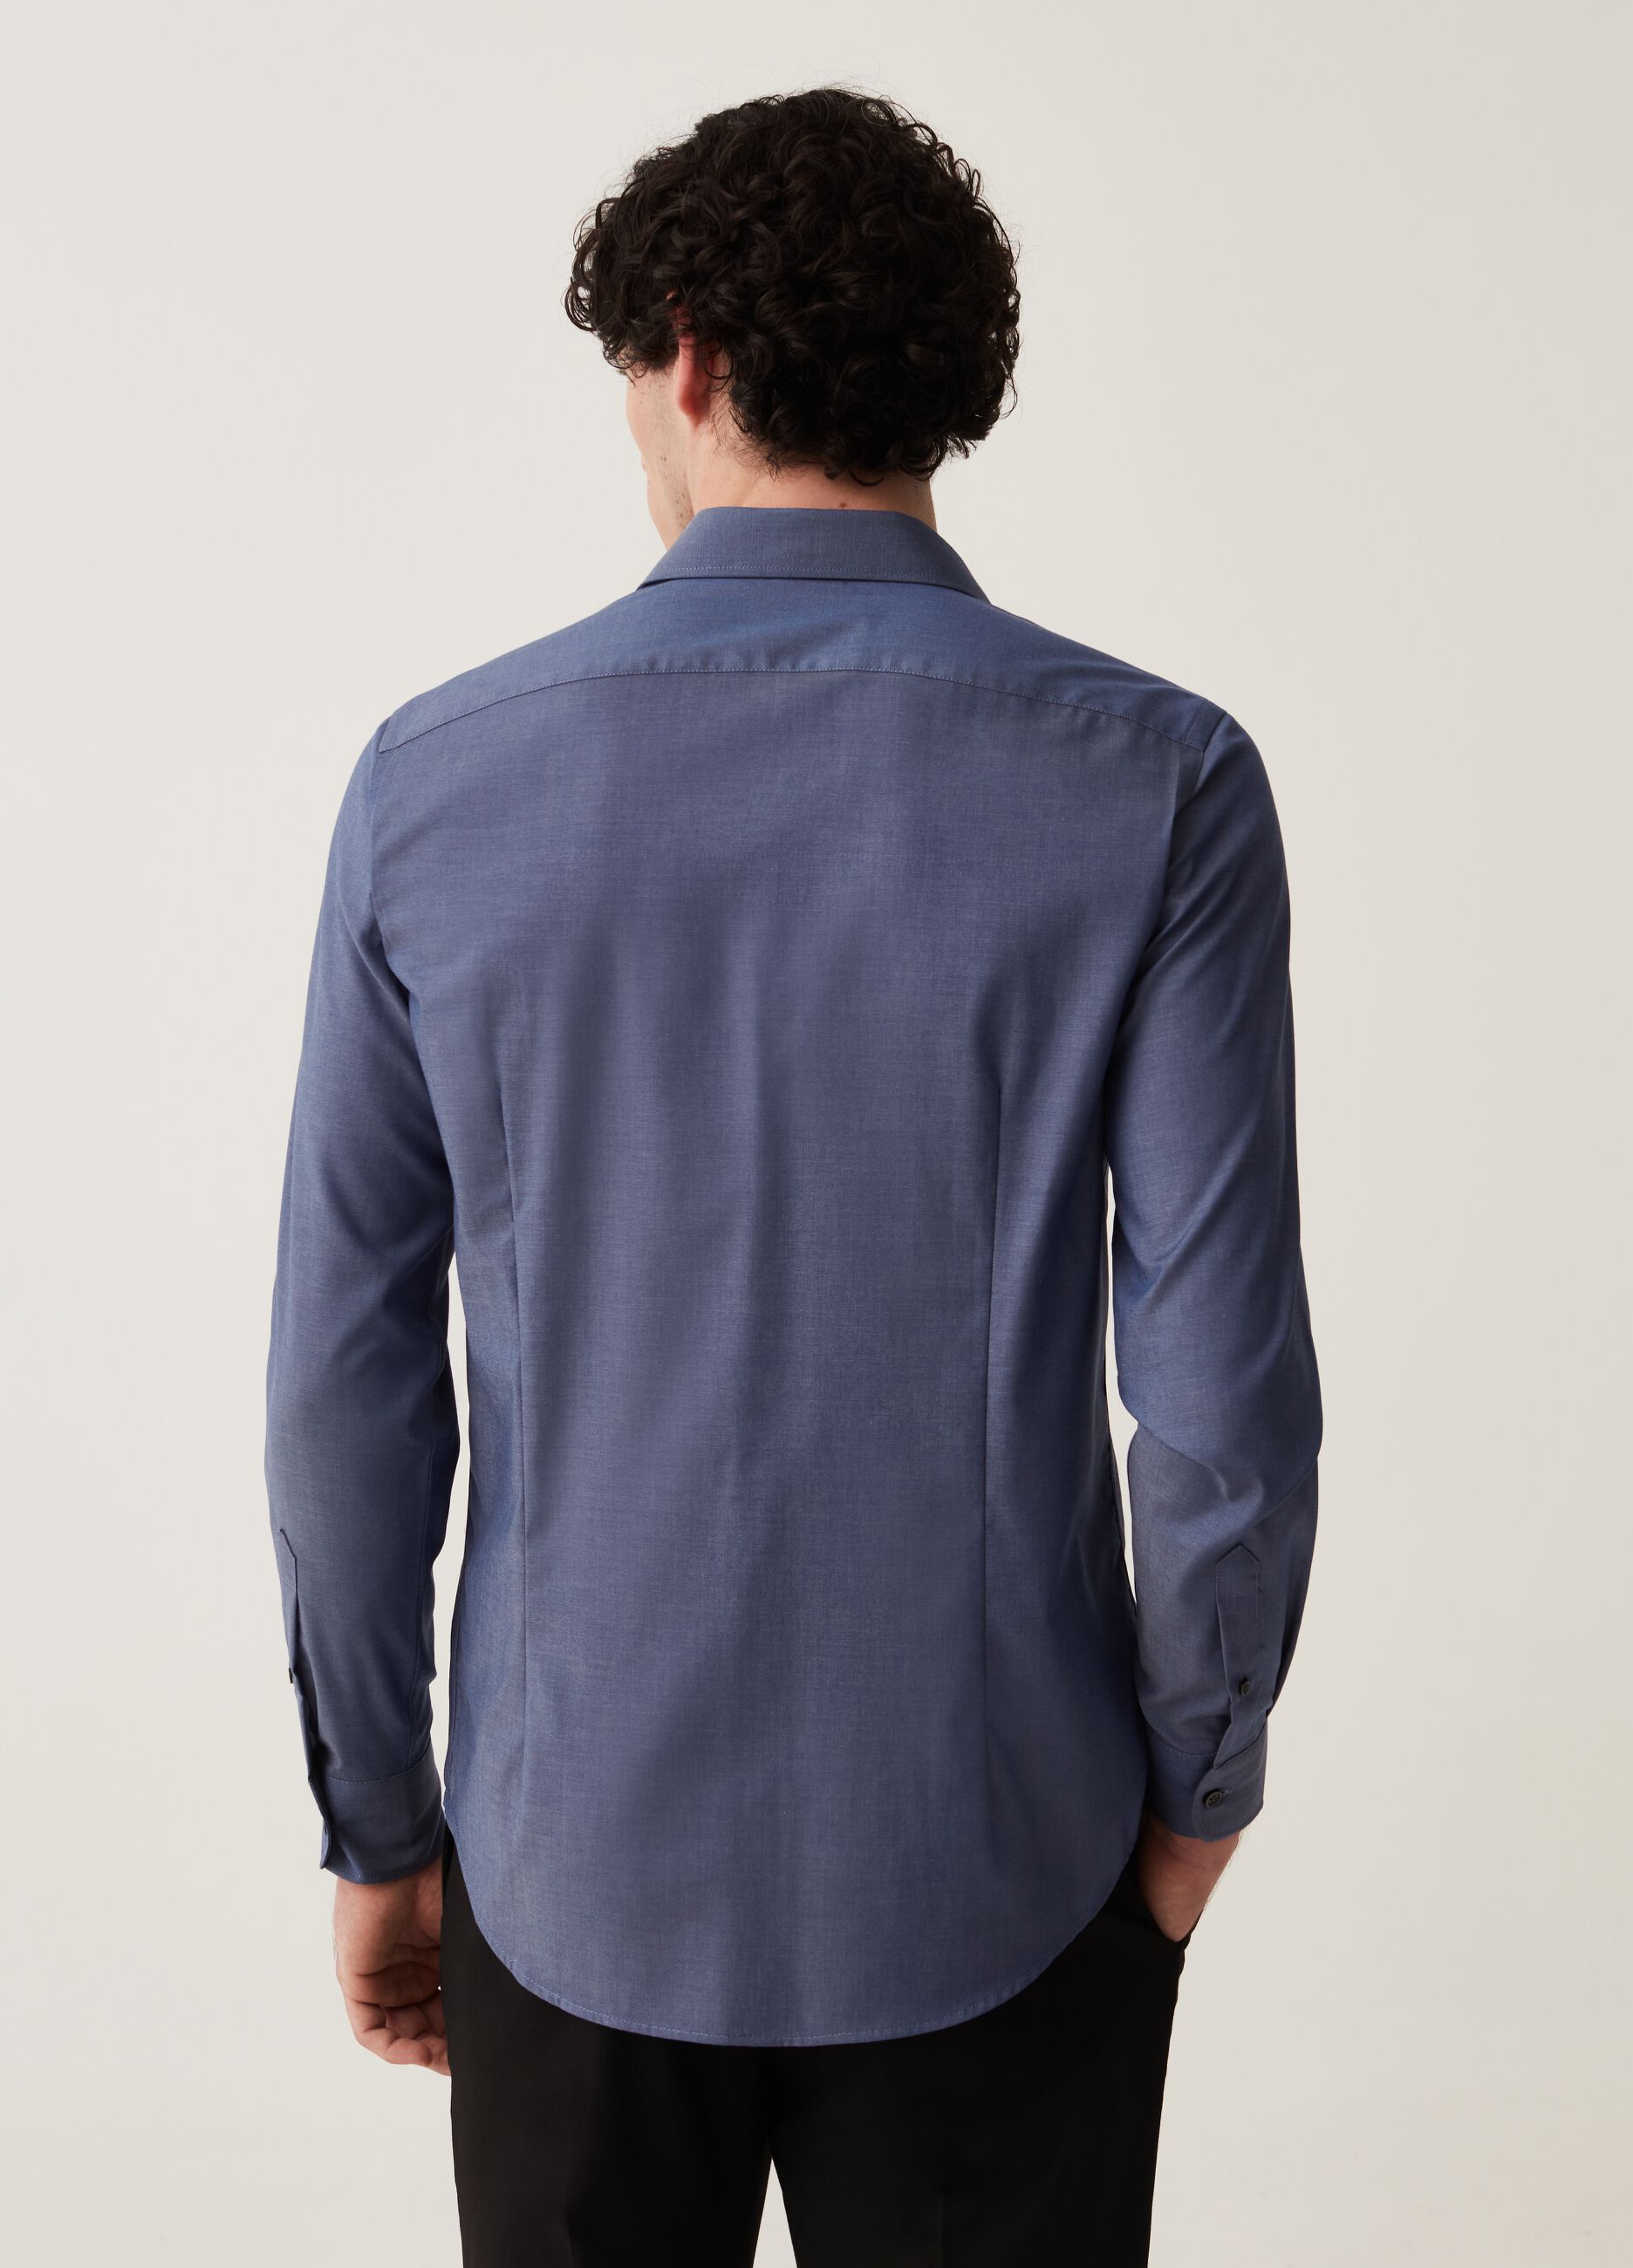 Slim-fit shirt in no-iron cotton chambray